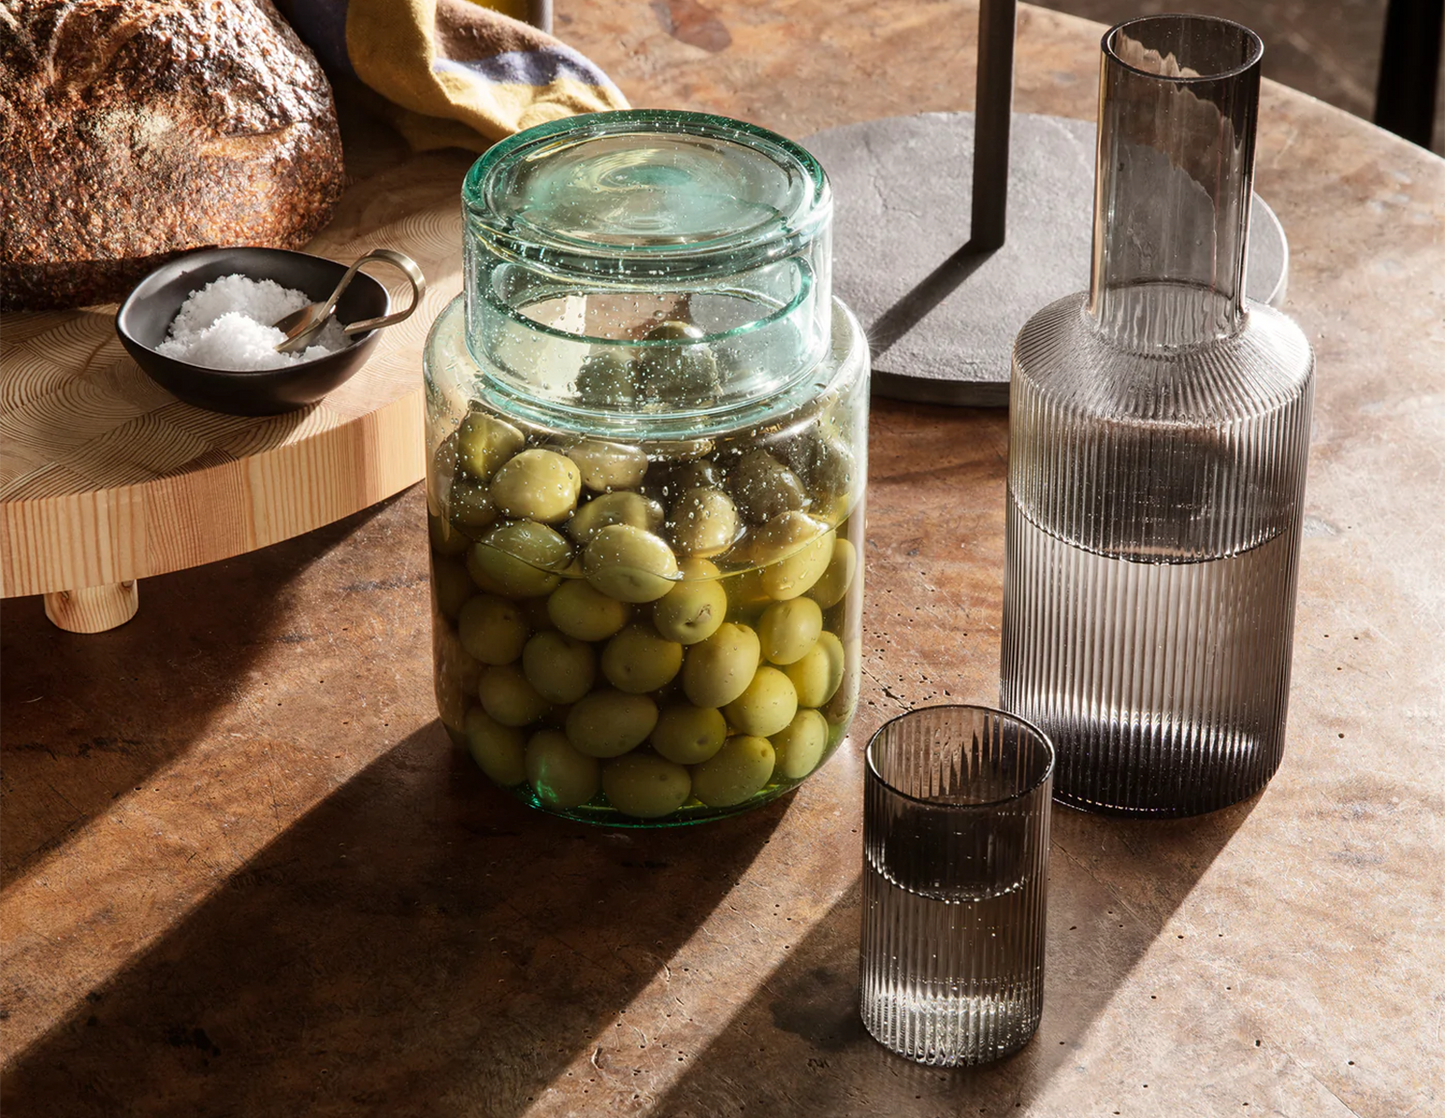 Grey Smoked Ripple Verrines by Ferm Living on a table setting next to olives and a carafe